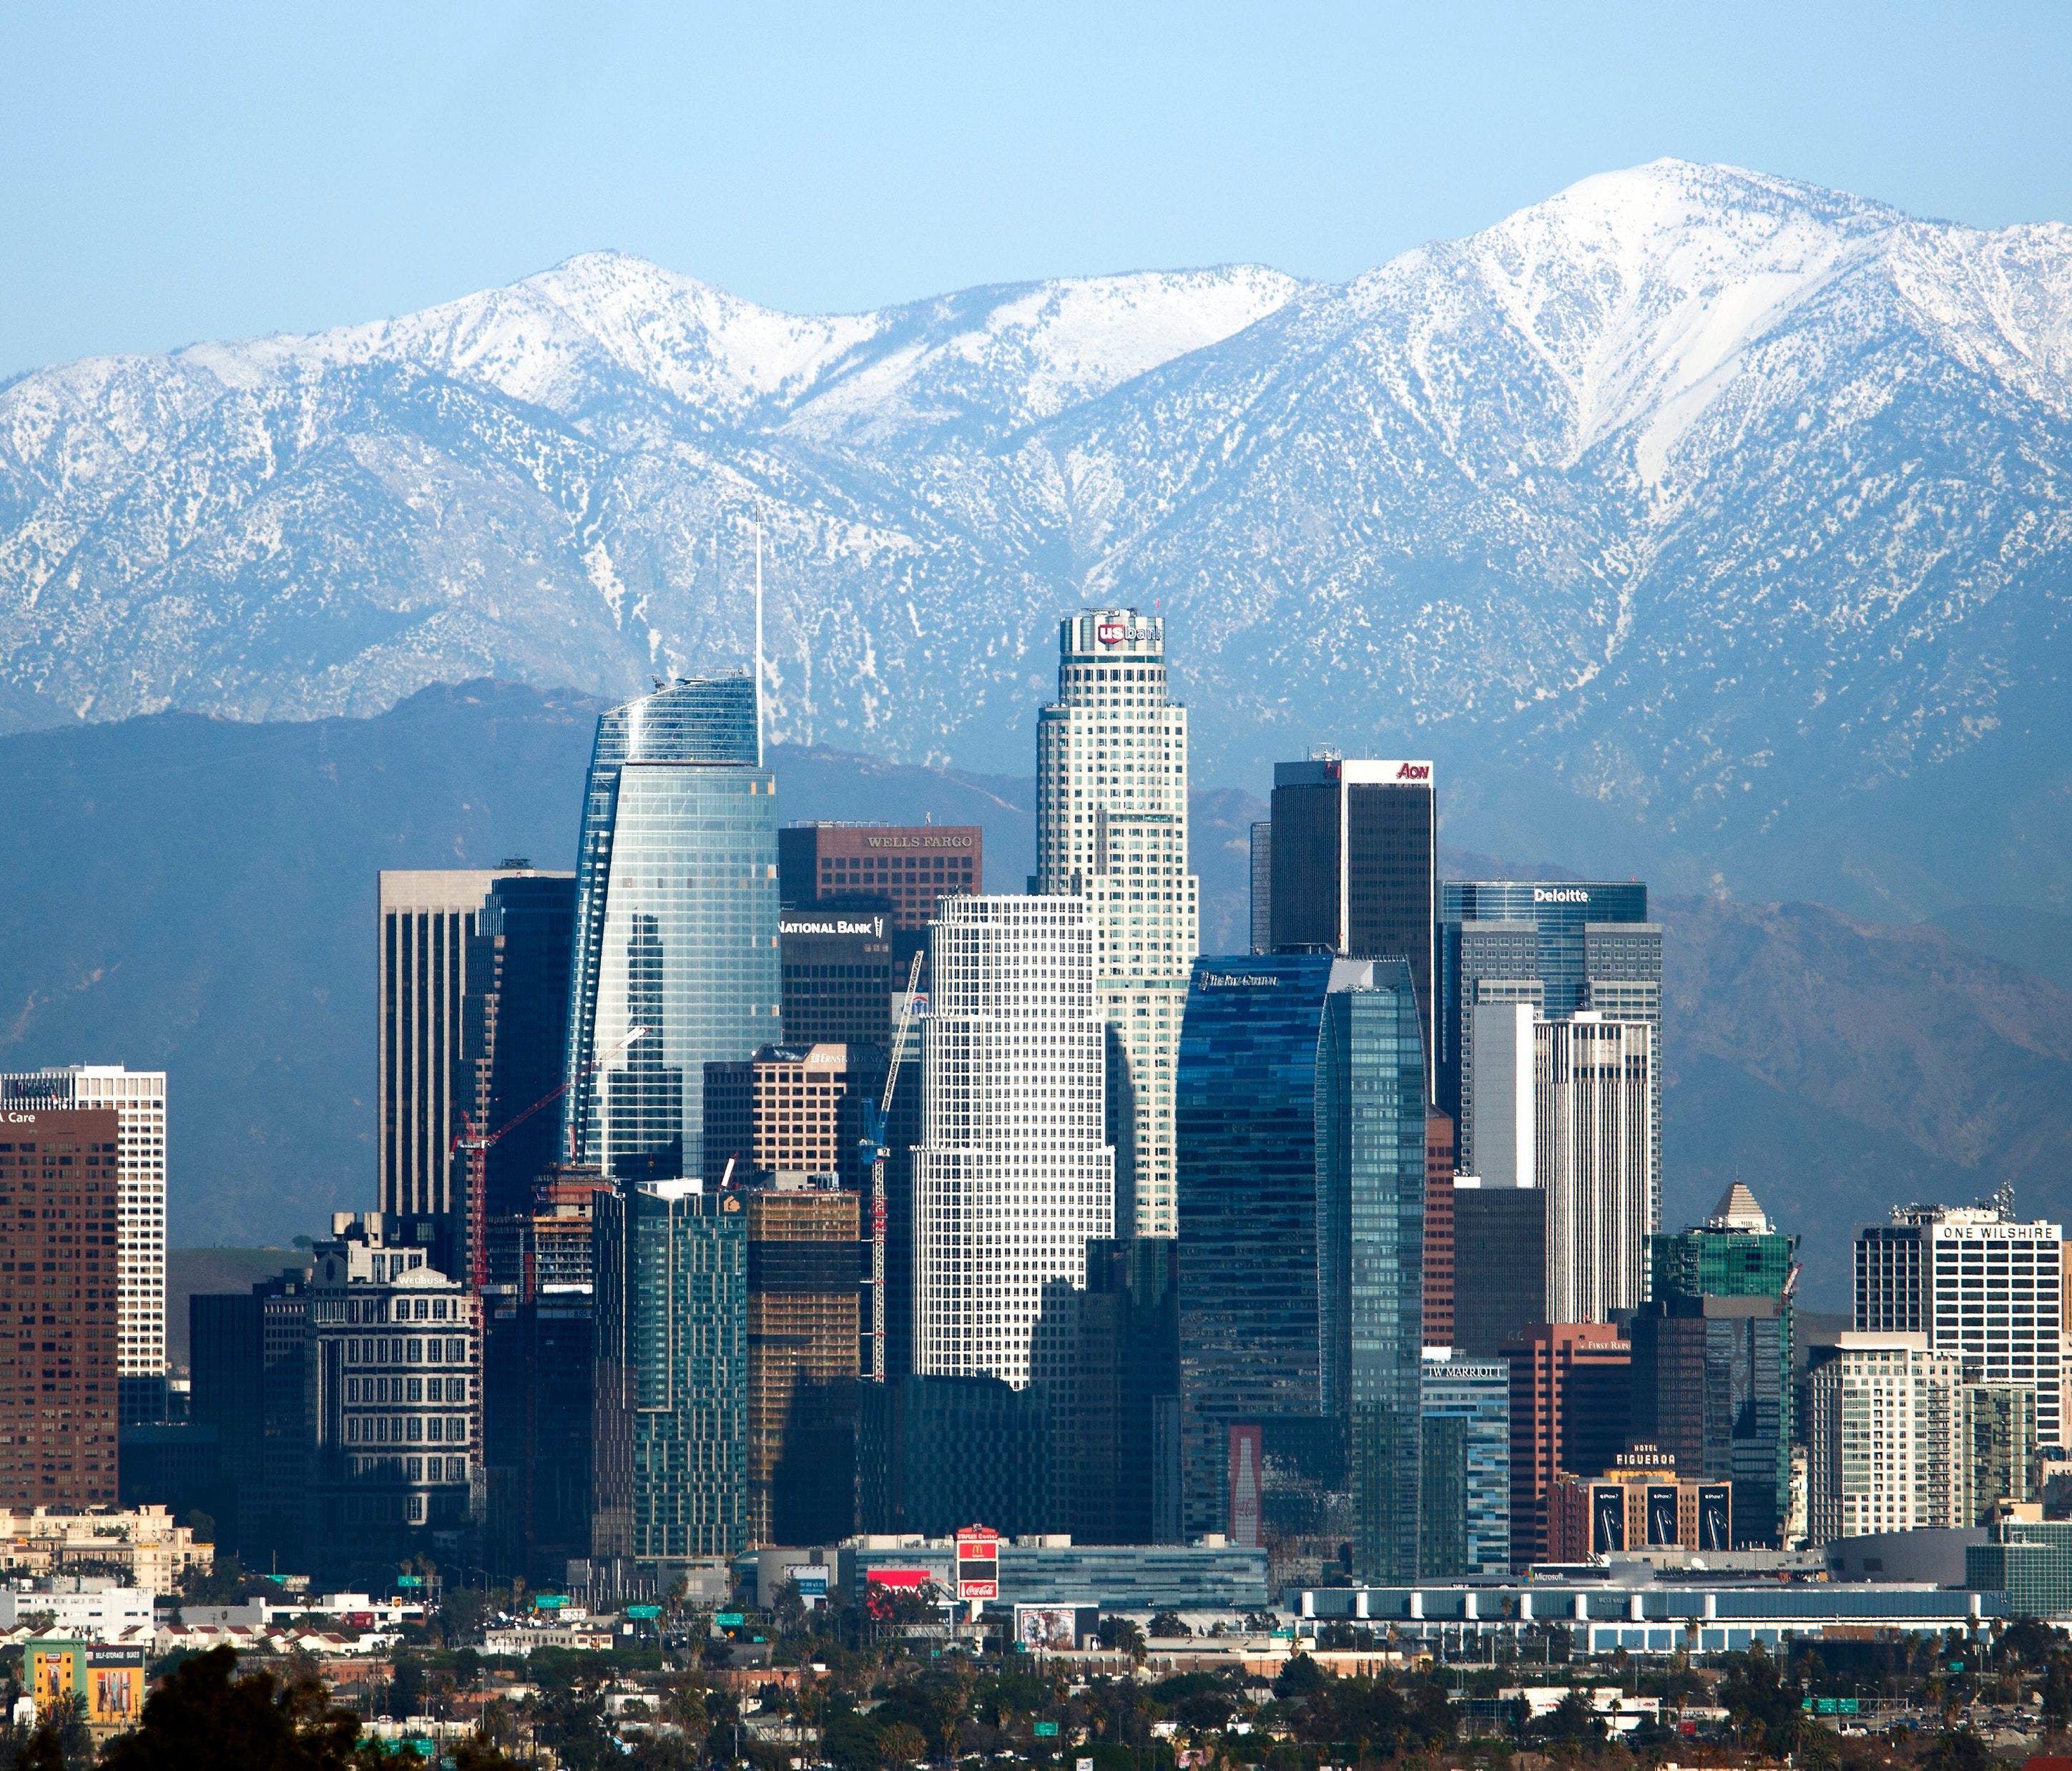 Snow-covered peaks on the San Gabriel mountains from recent storms frame the skyline of Los Angeles on Dec. 27, 2016.